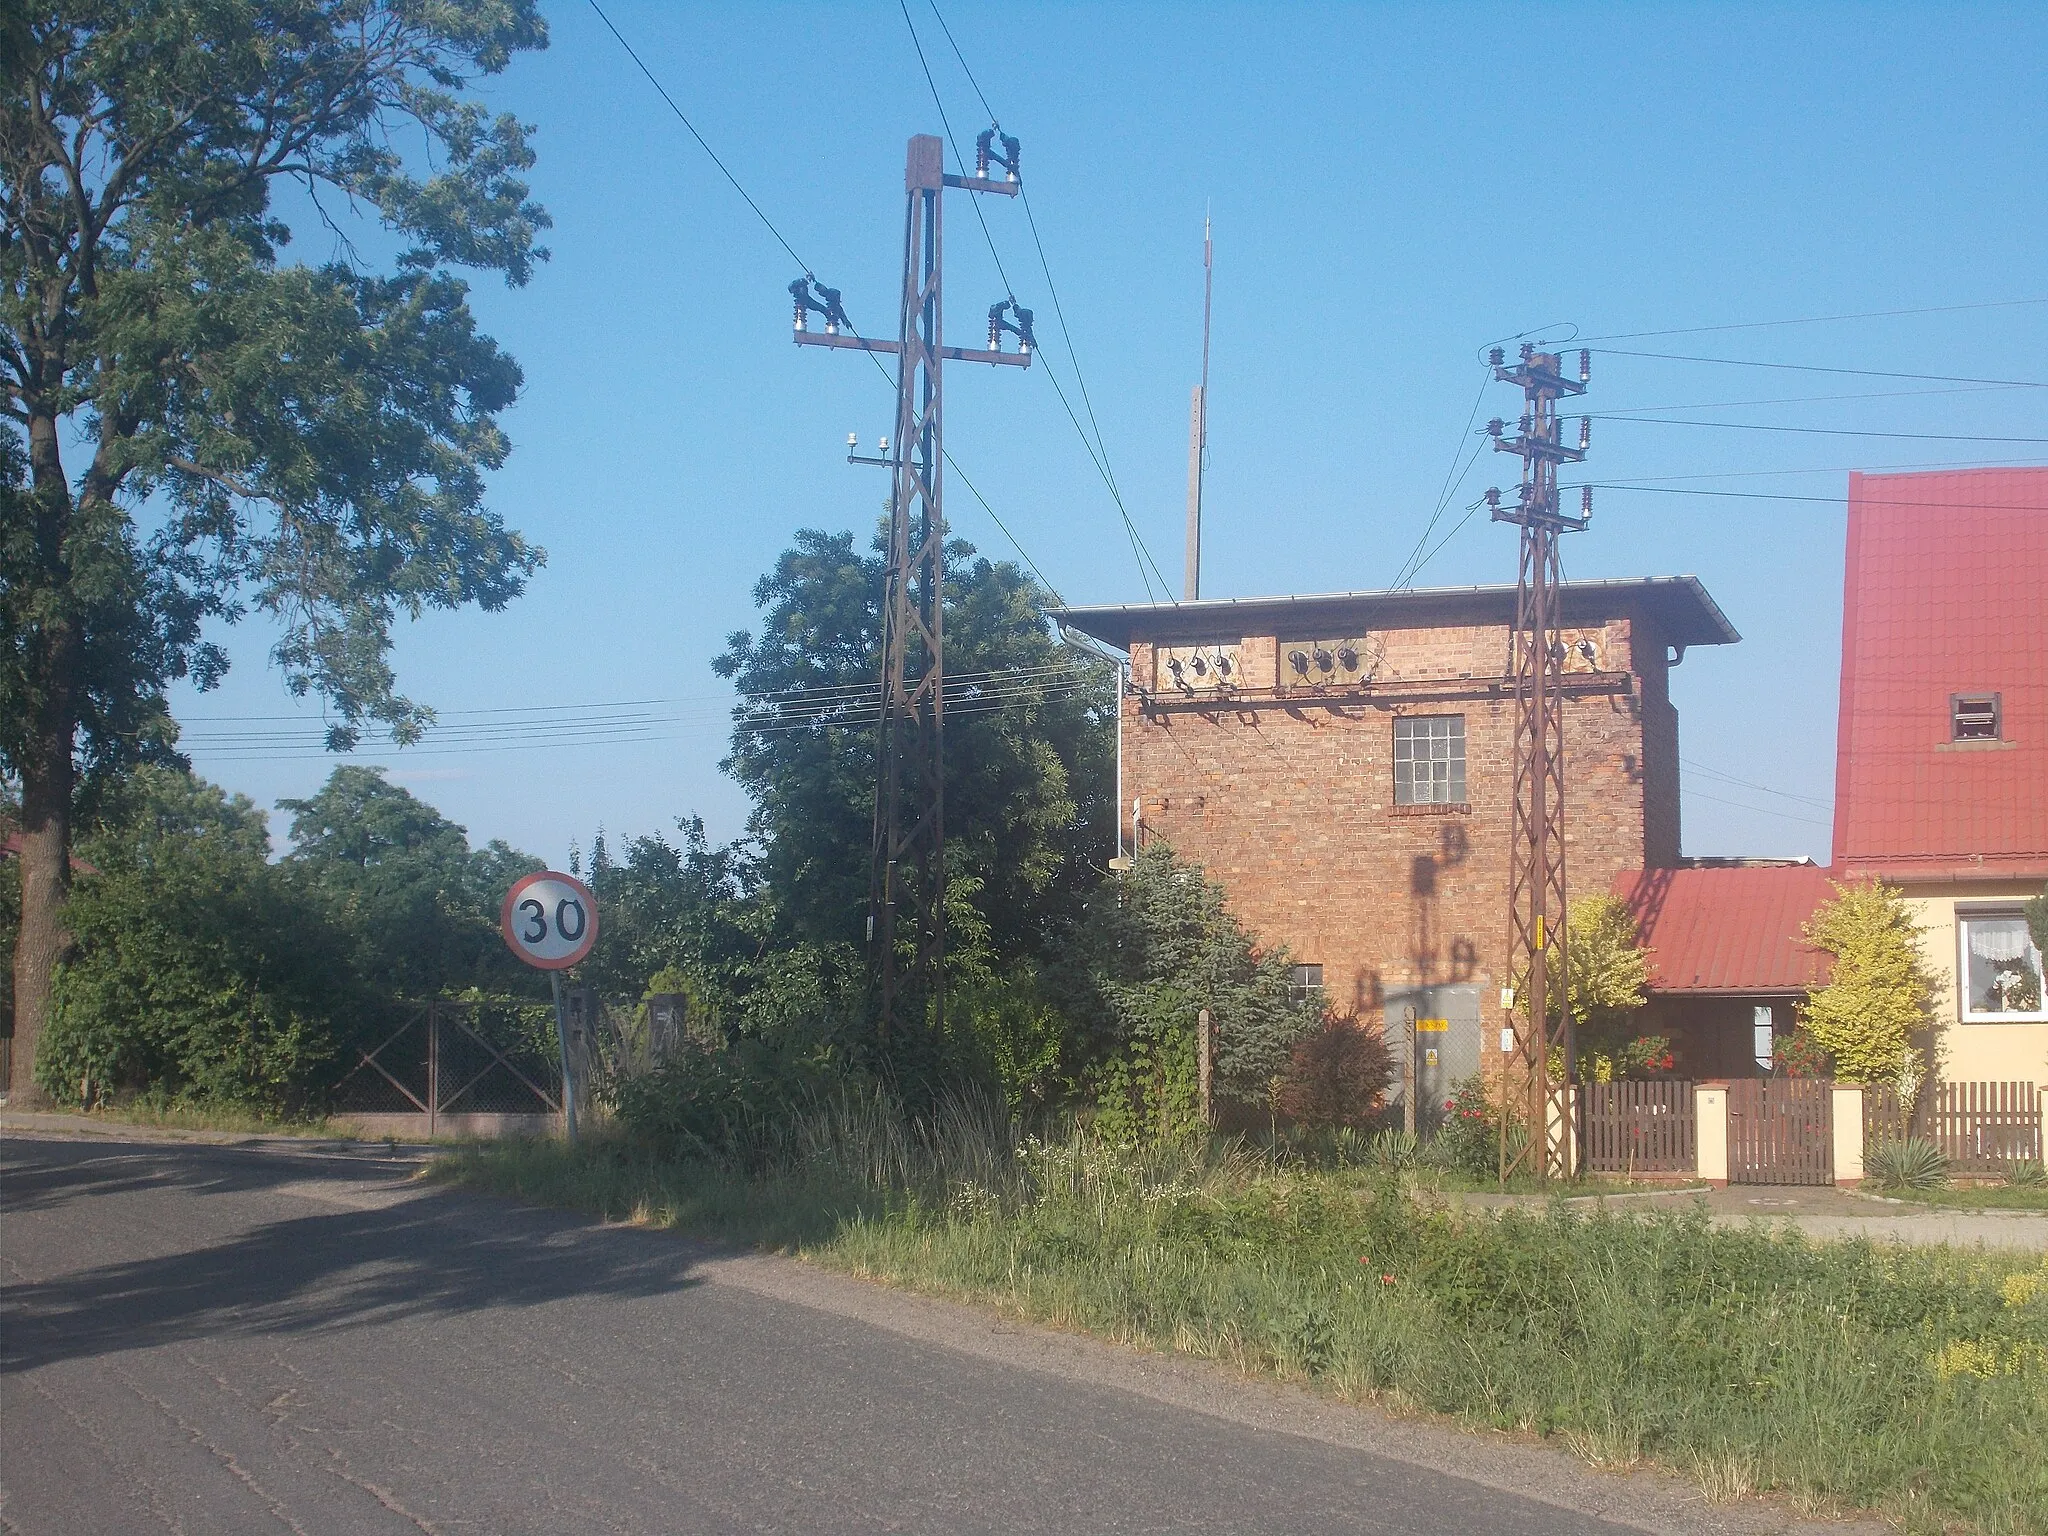 Photo showing: Old substation from 1910 - 1925, still in serivce